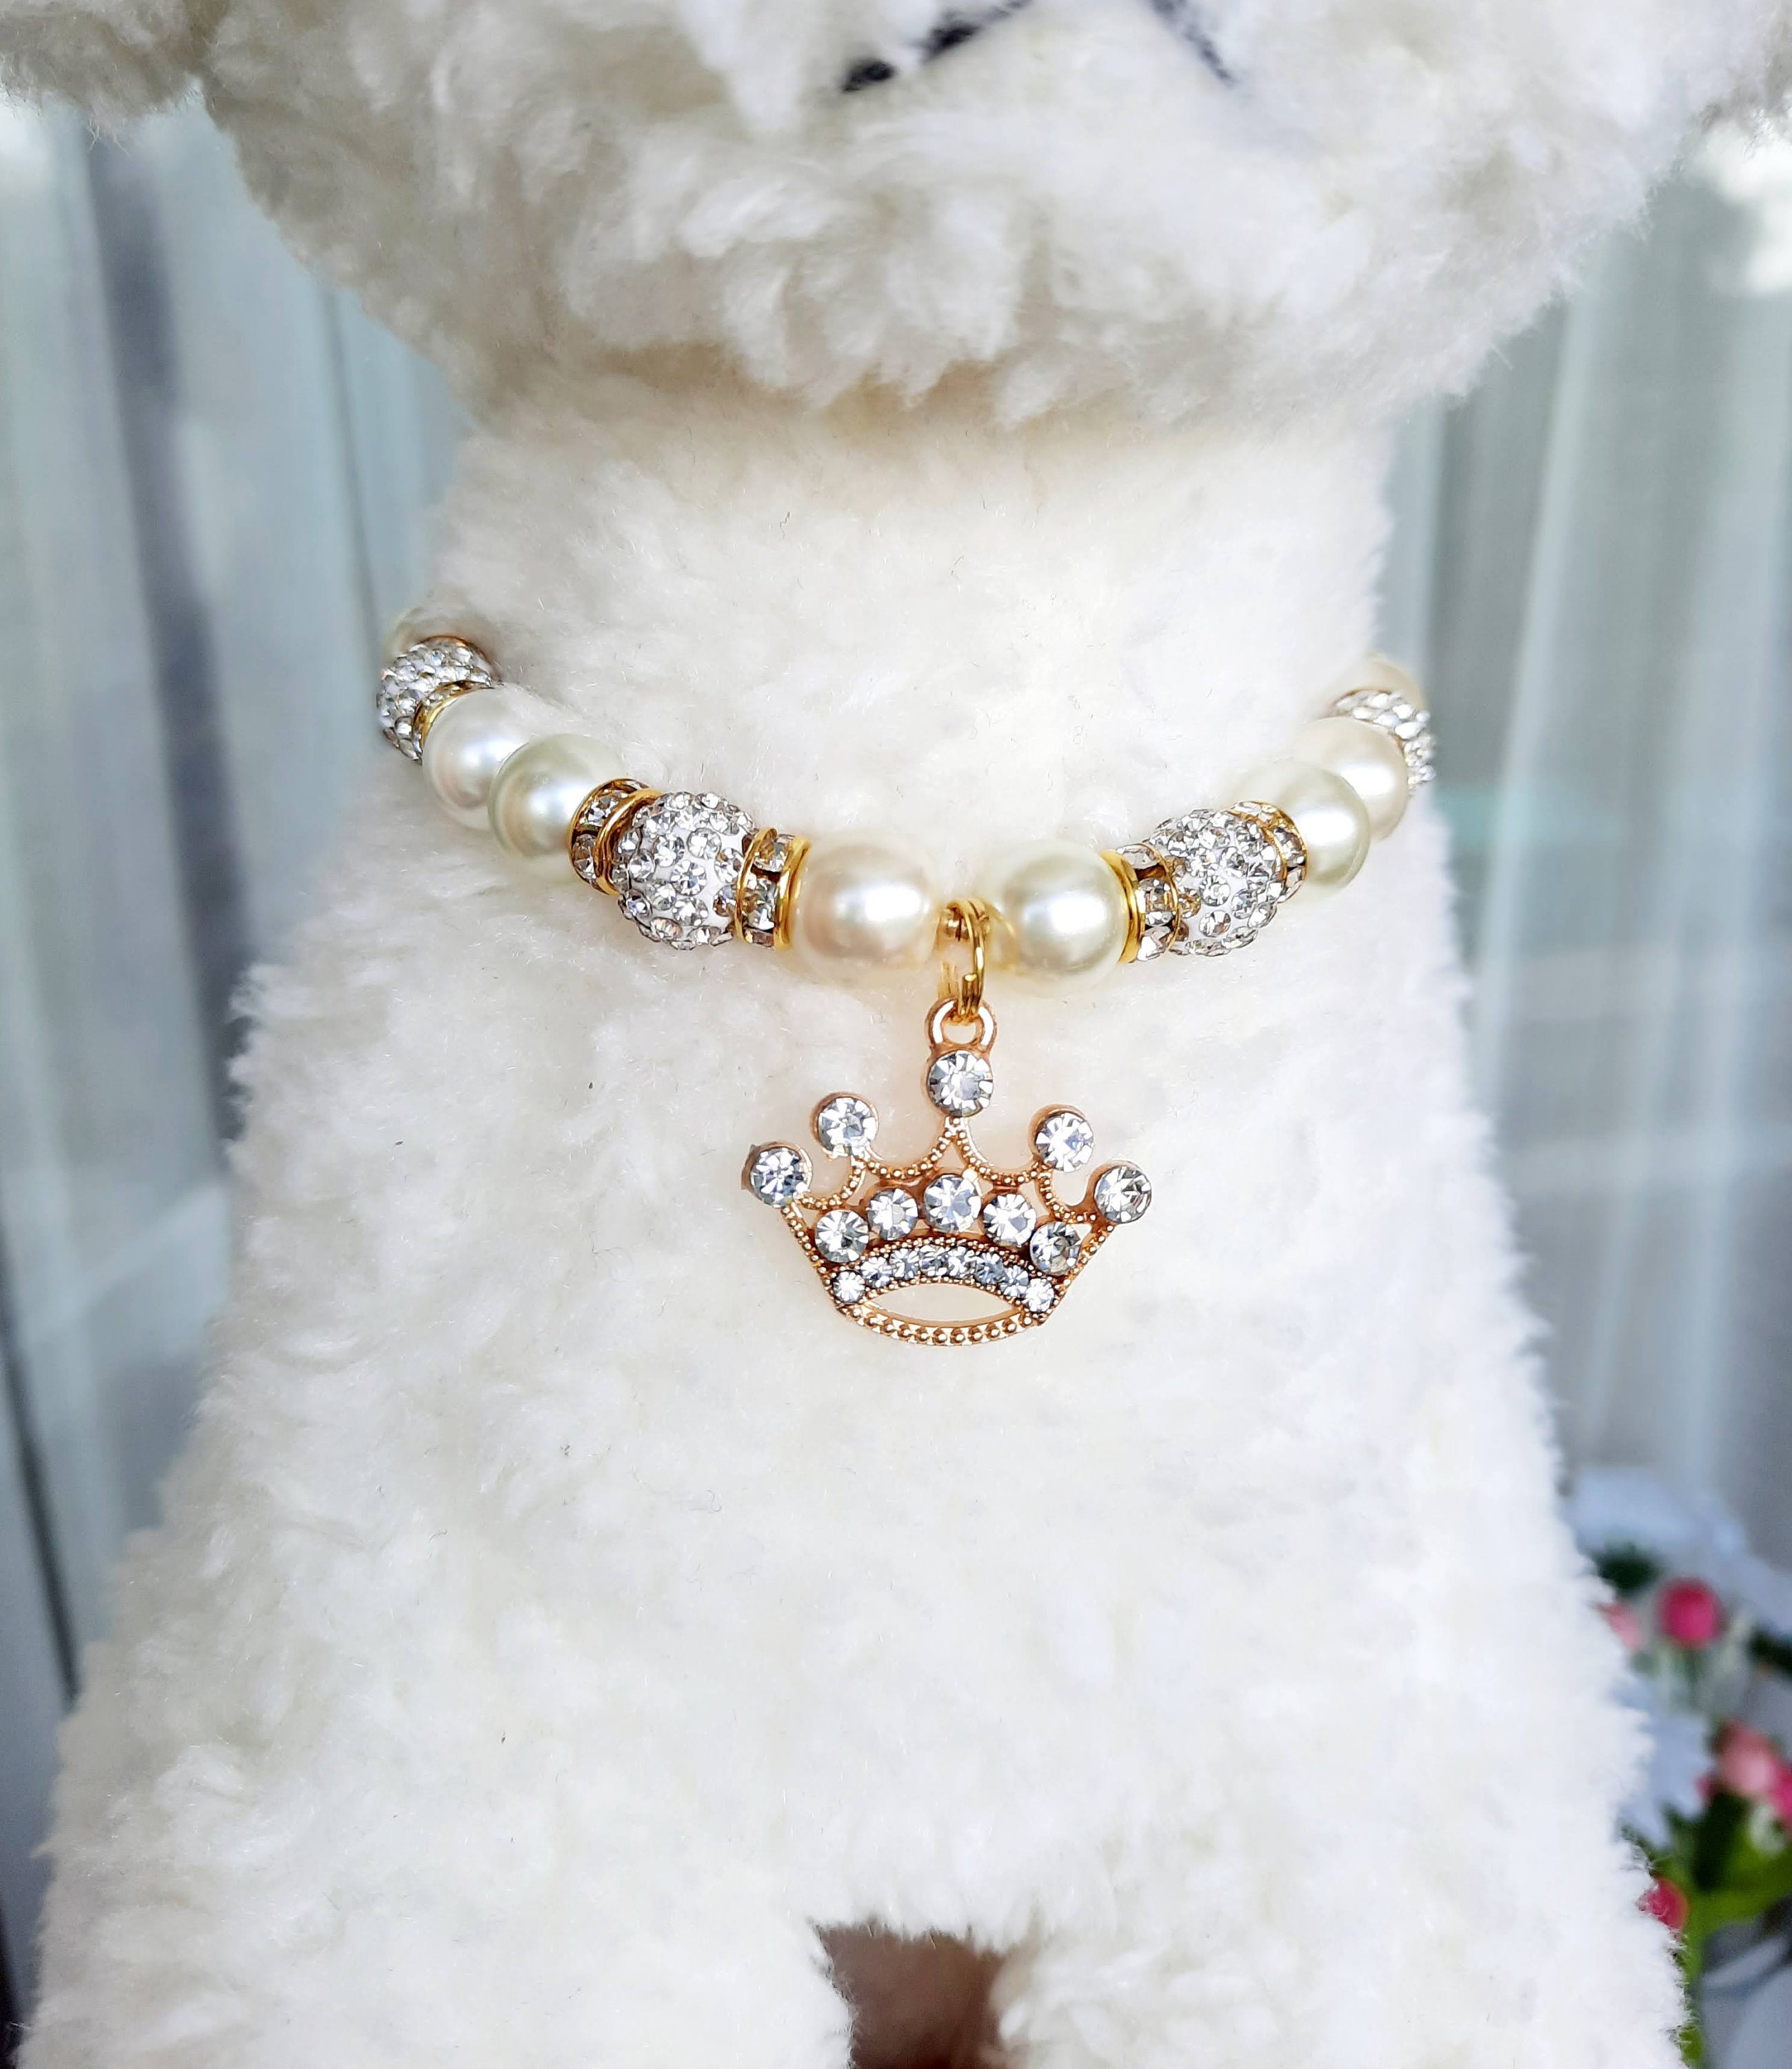 Dog Pearl Necklace - Vanity Collars & Leashes